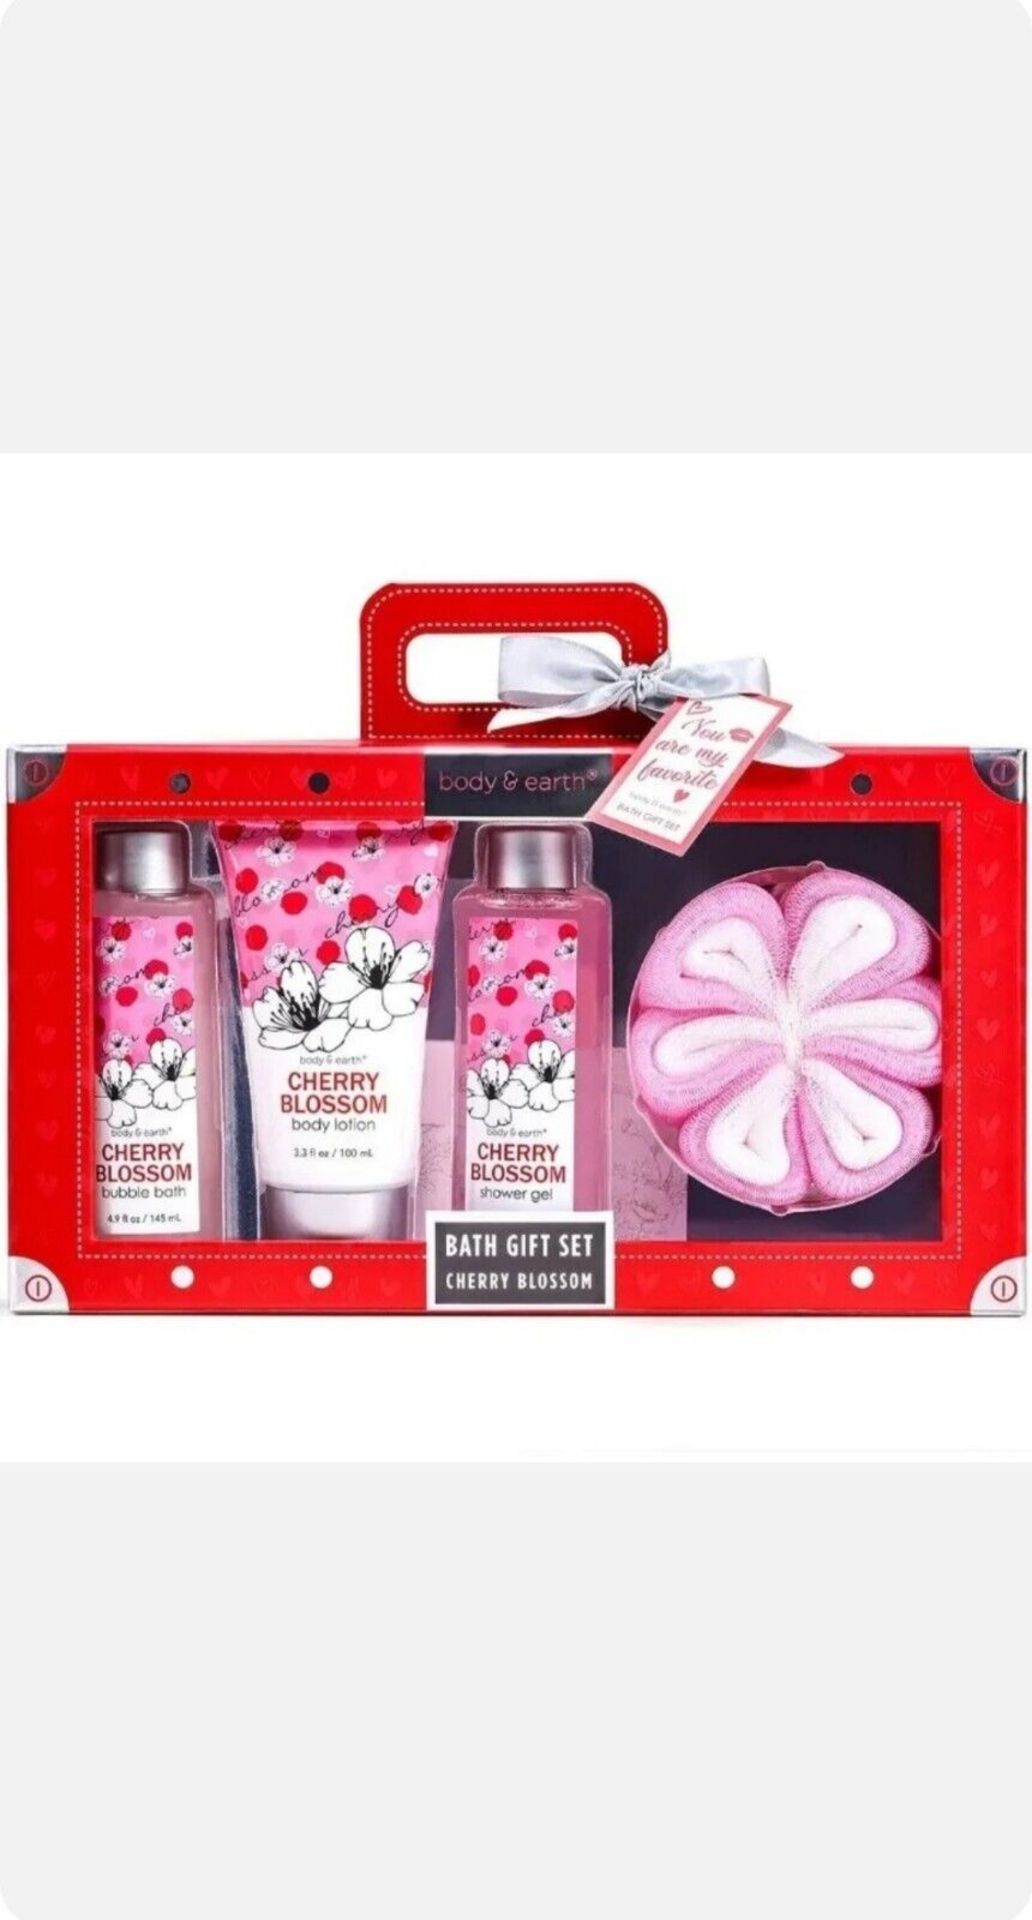 TRADE LOT 48 X NEW BOXED BODY & EARTH Cherry Blossom 4 Piece Gift Sets. RRP £19.99 each. (BFF-BP-